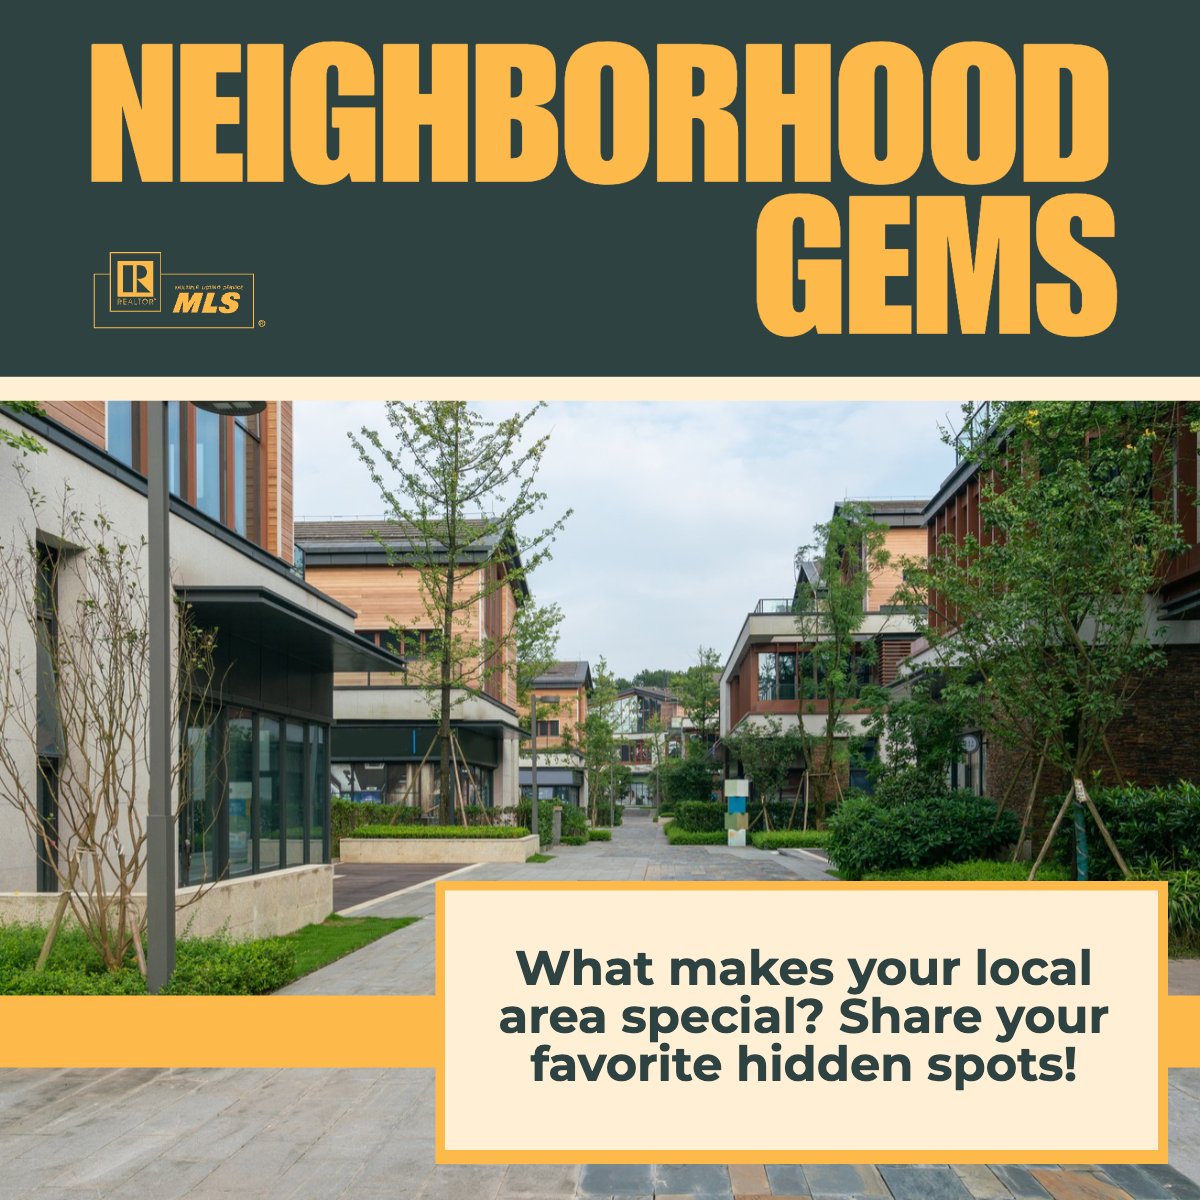 What would you recommend in your local communities? 

Are there any hidden cafes, bookshops, or restaurants? 

Please share them below!

#LocalGems #CommunitySupport #LocalBusinesses 
 #BorahRealtySource #Borahsdiditagain #Borahsoldit #bestteamintown #6788737018